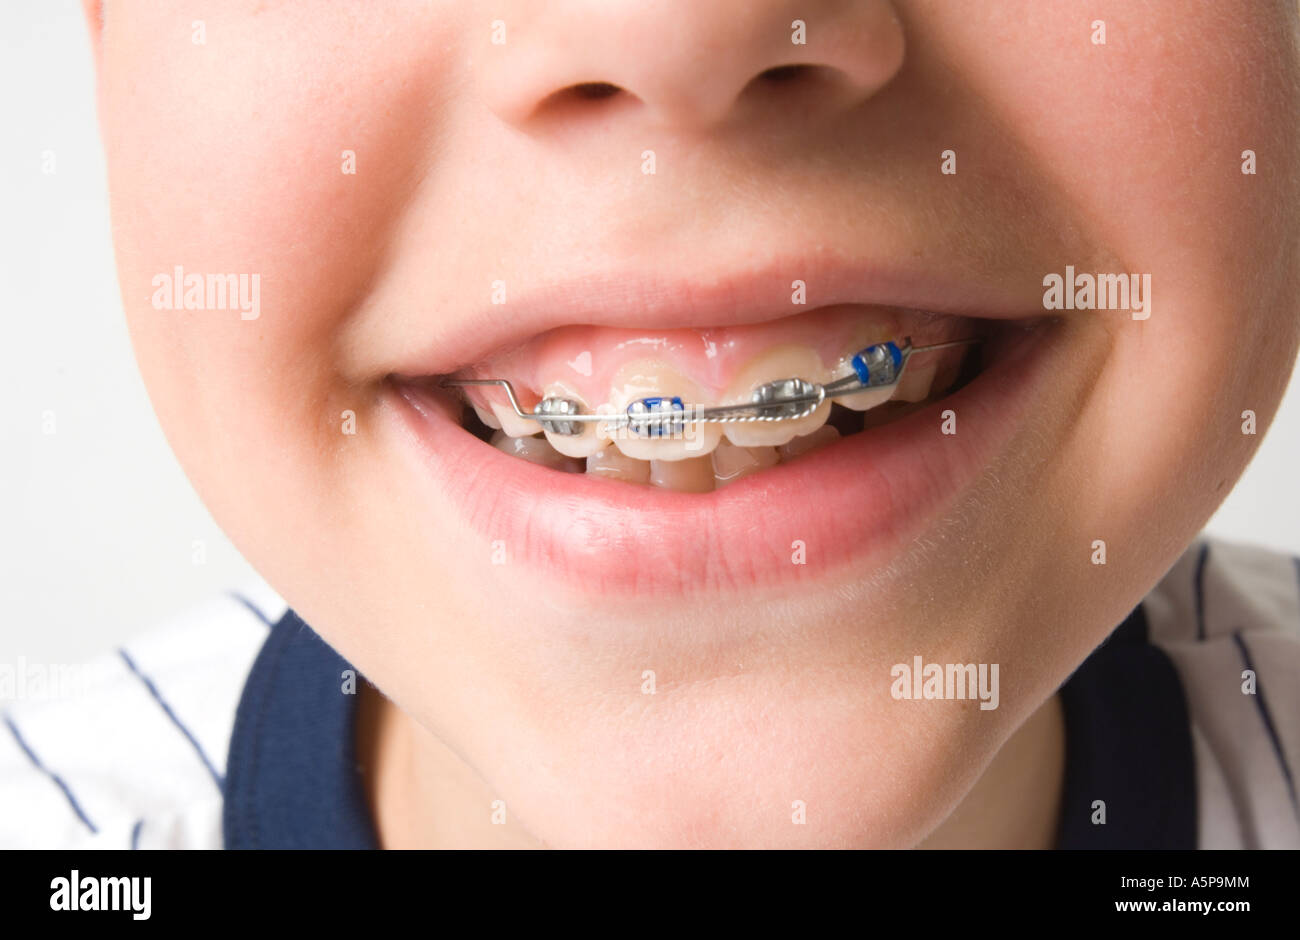 Smiling mouth, teeth with braces. Stock Photo